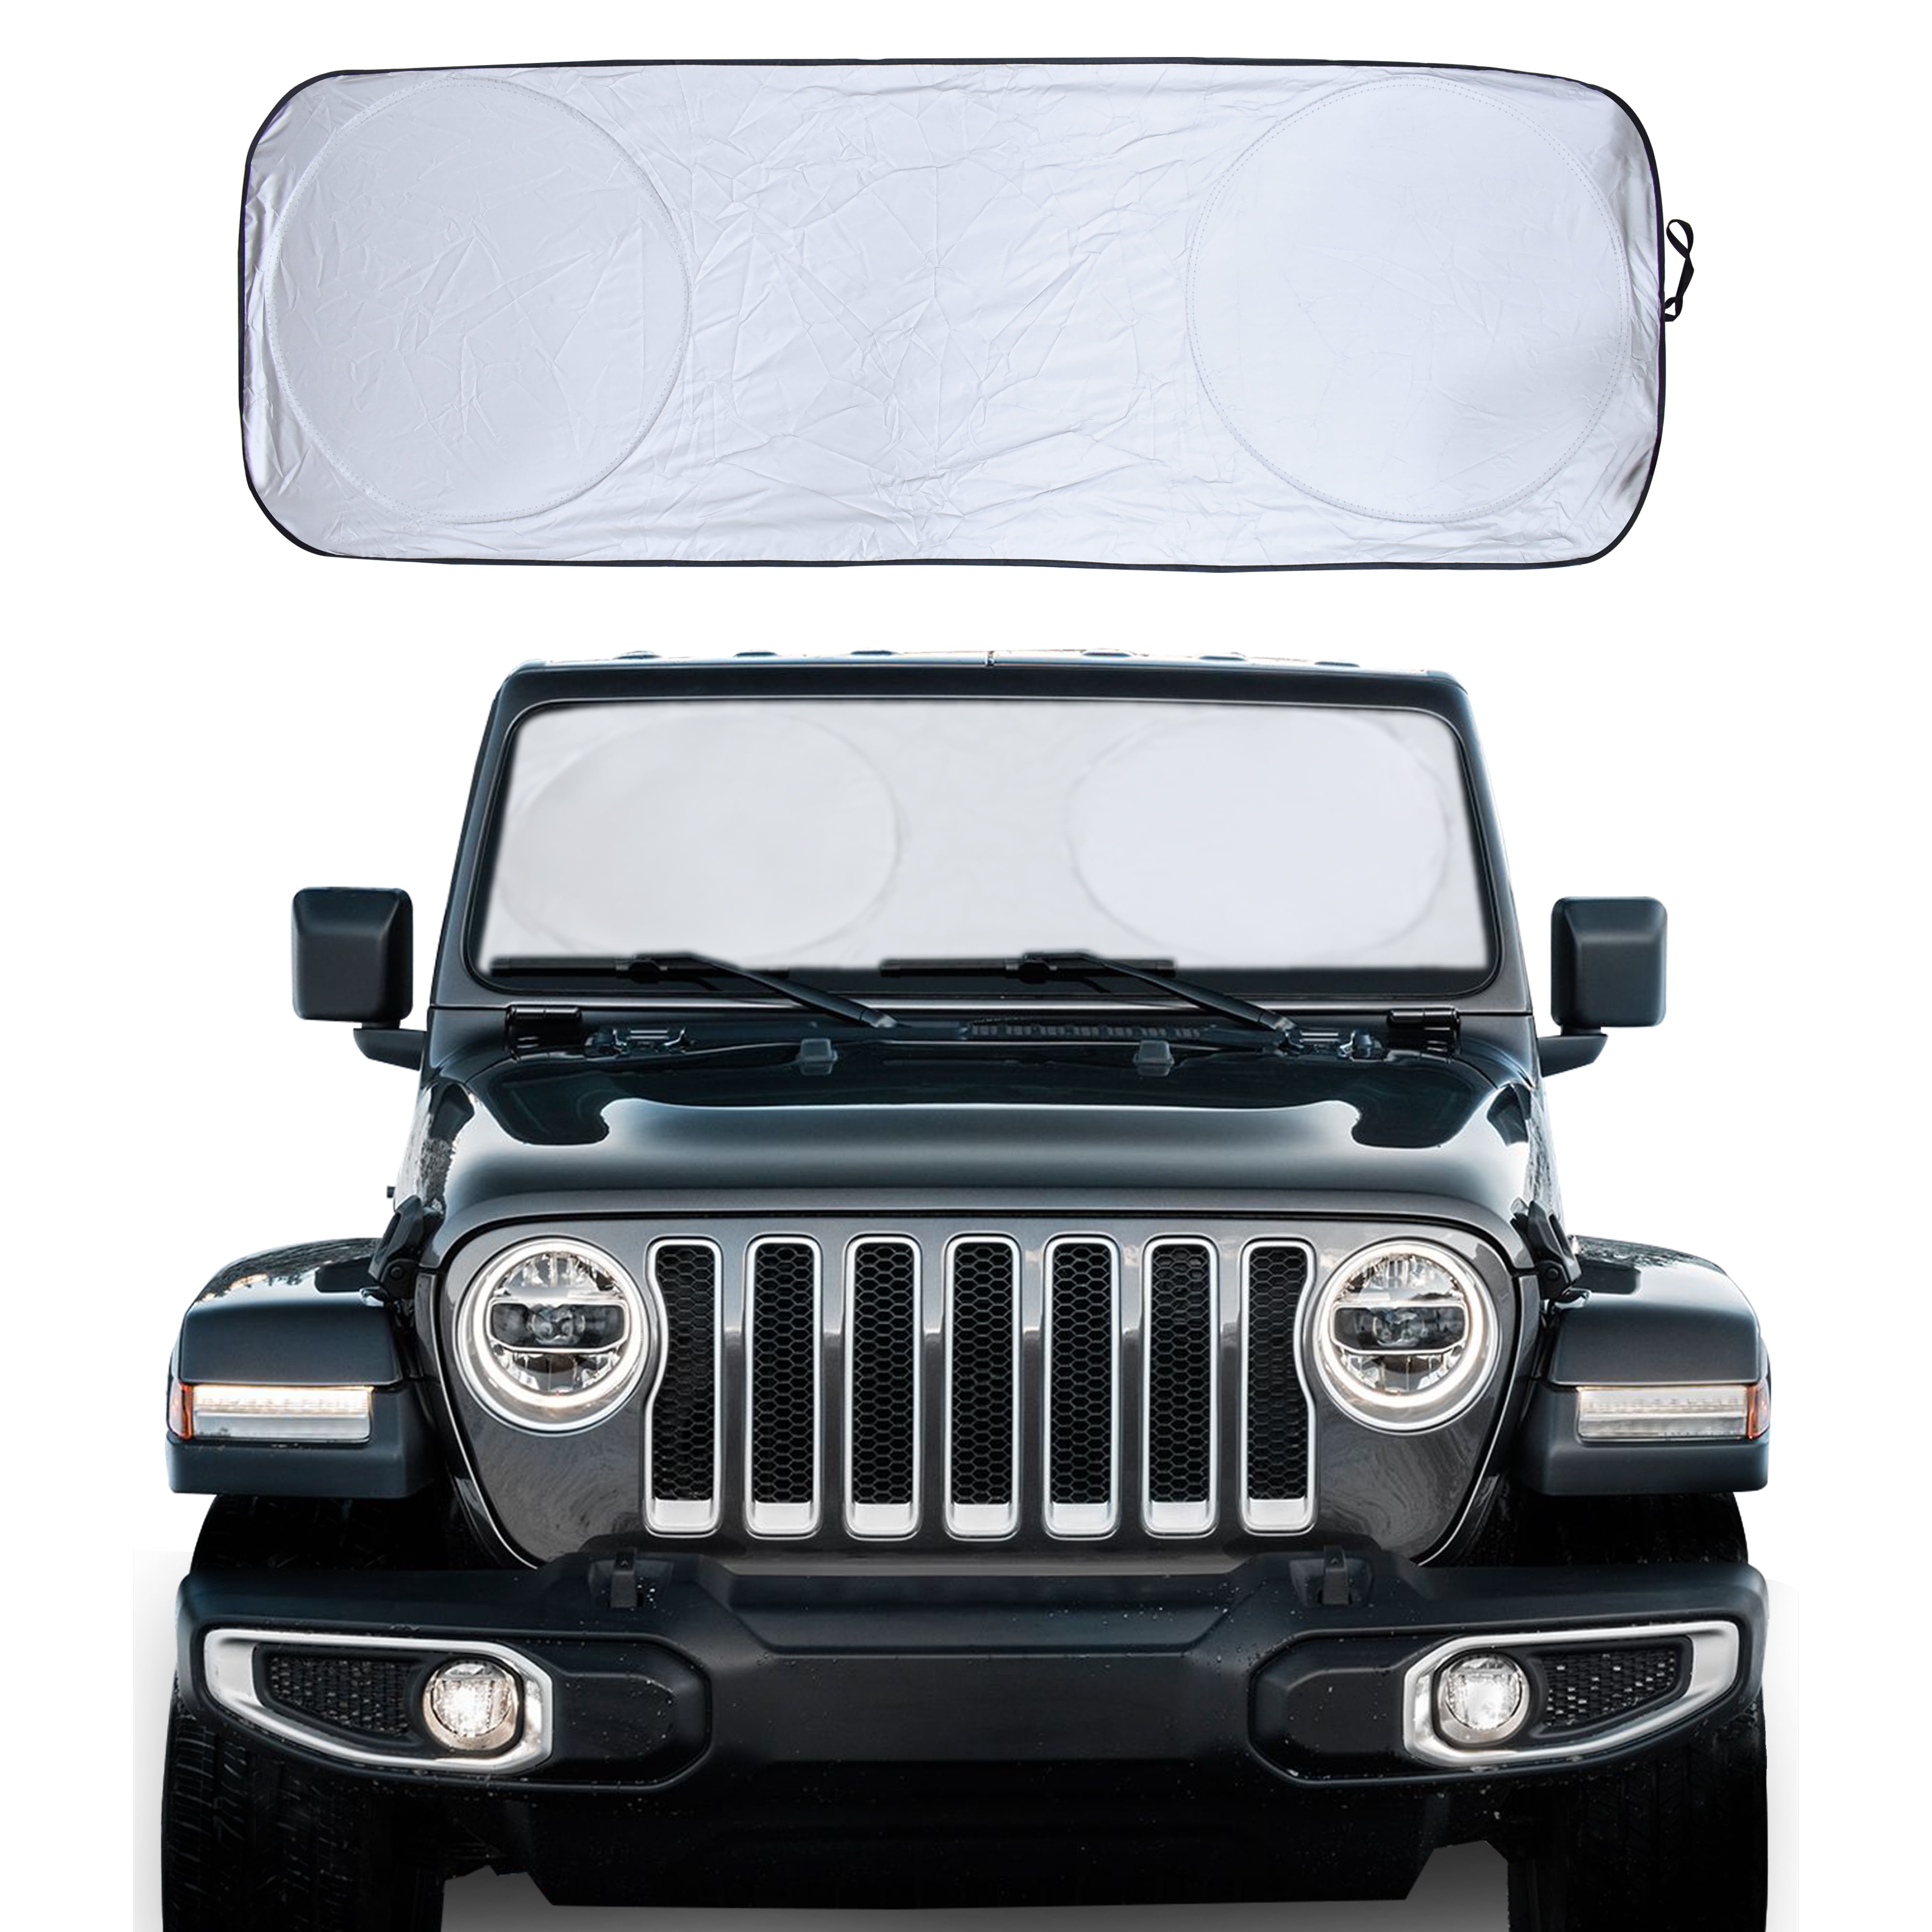 Large 63 x 33.5 inches Fits Windshields of Various Sizes Sunshade To Keep Your Vehicle Cool And Damage Free Blocks UV Rays Sun Visor Protector EcoNour Car Windshield Sun Shade Easy To Use 